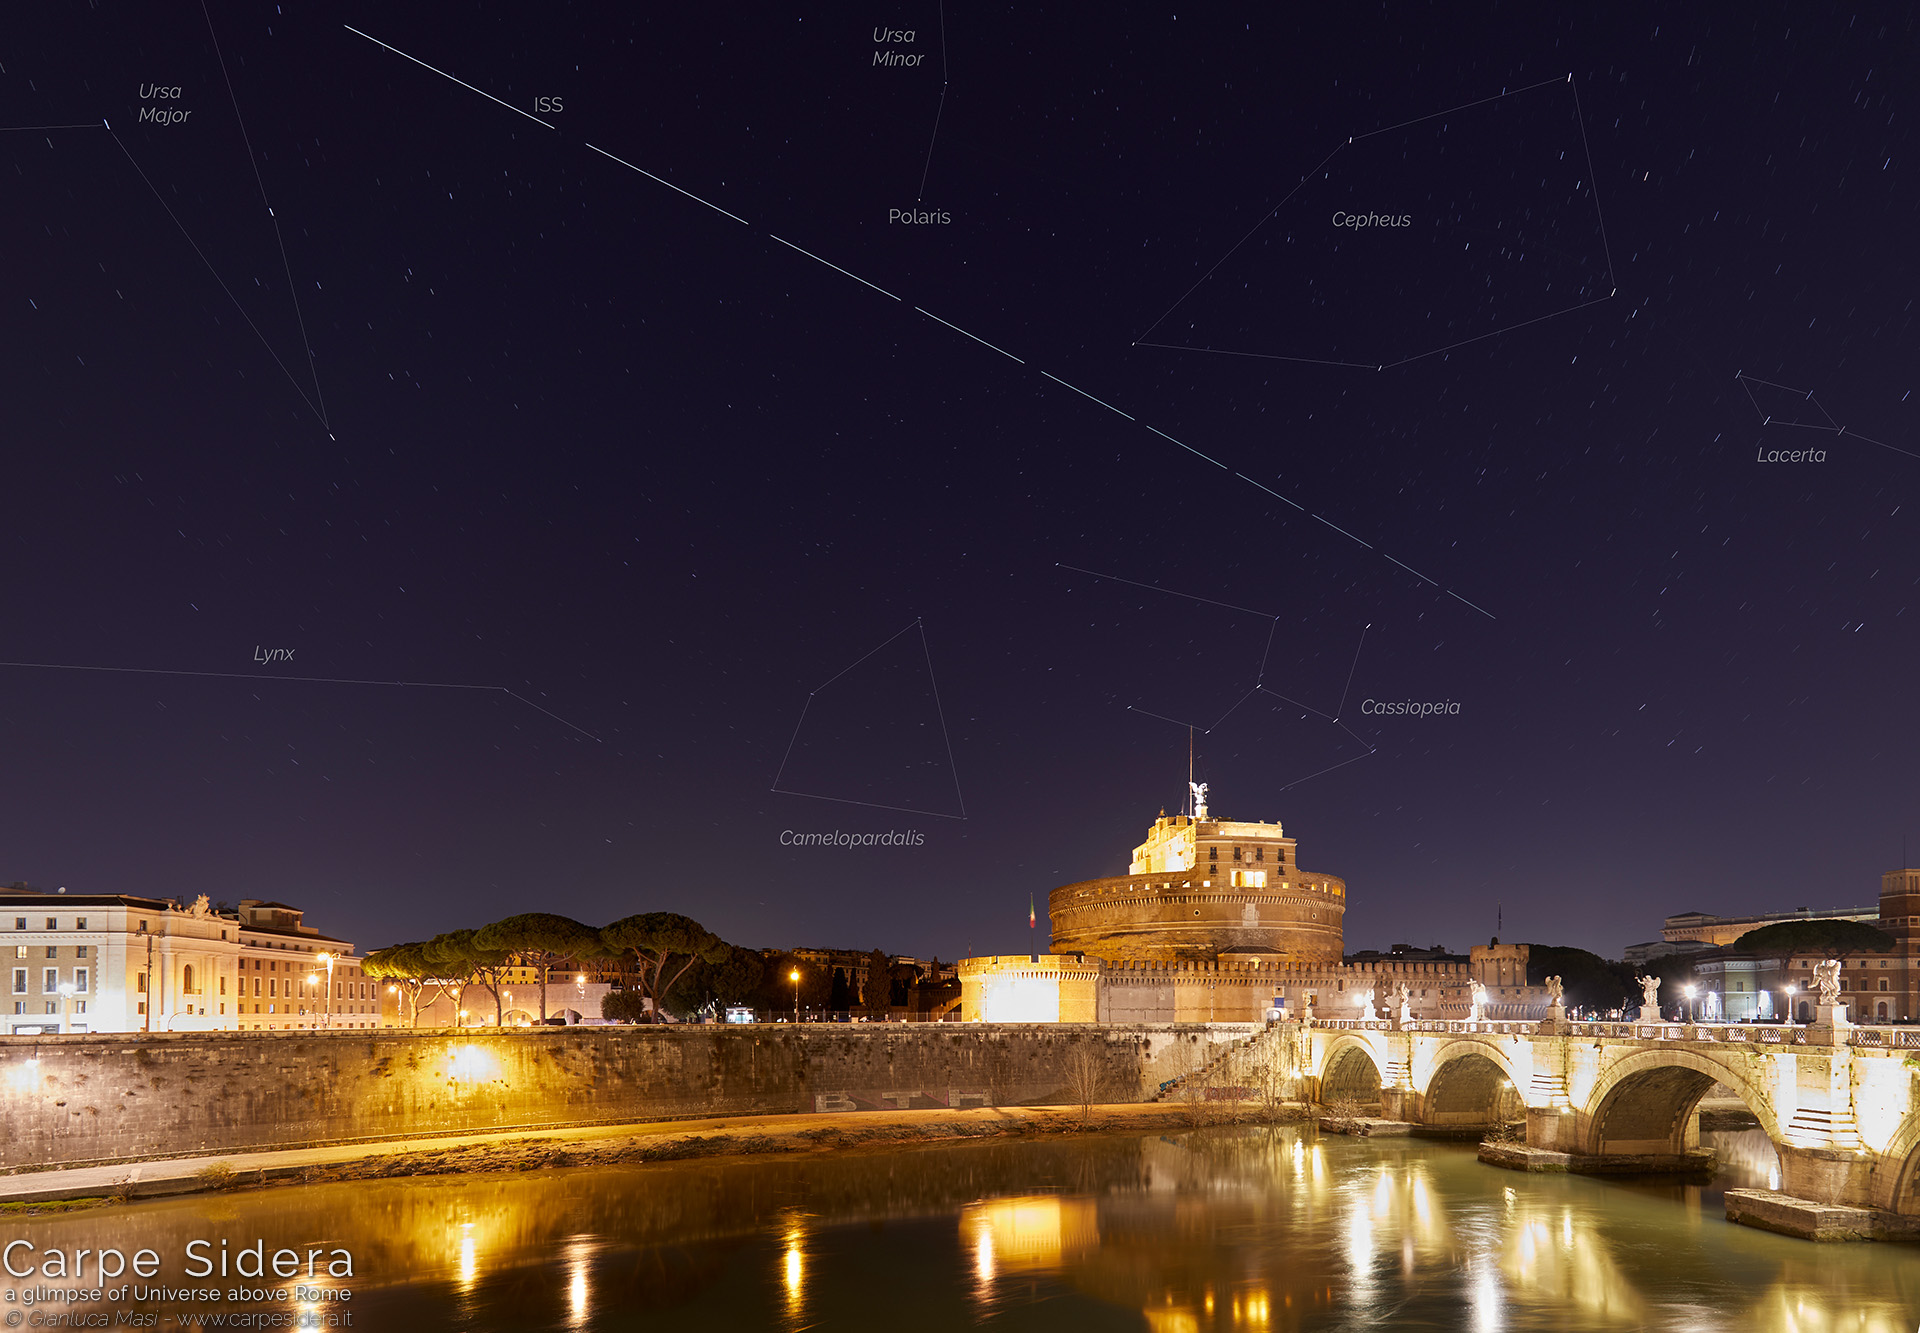 23. Castle of the Holy Angel, the Tiber and the International Space Station (ISS).